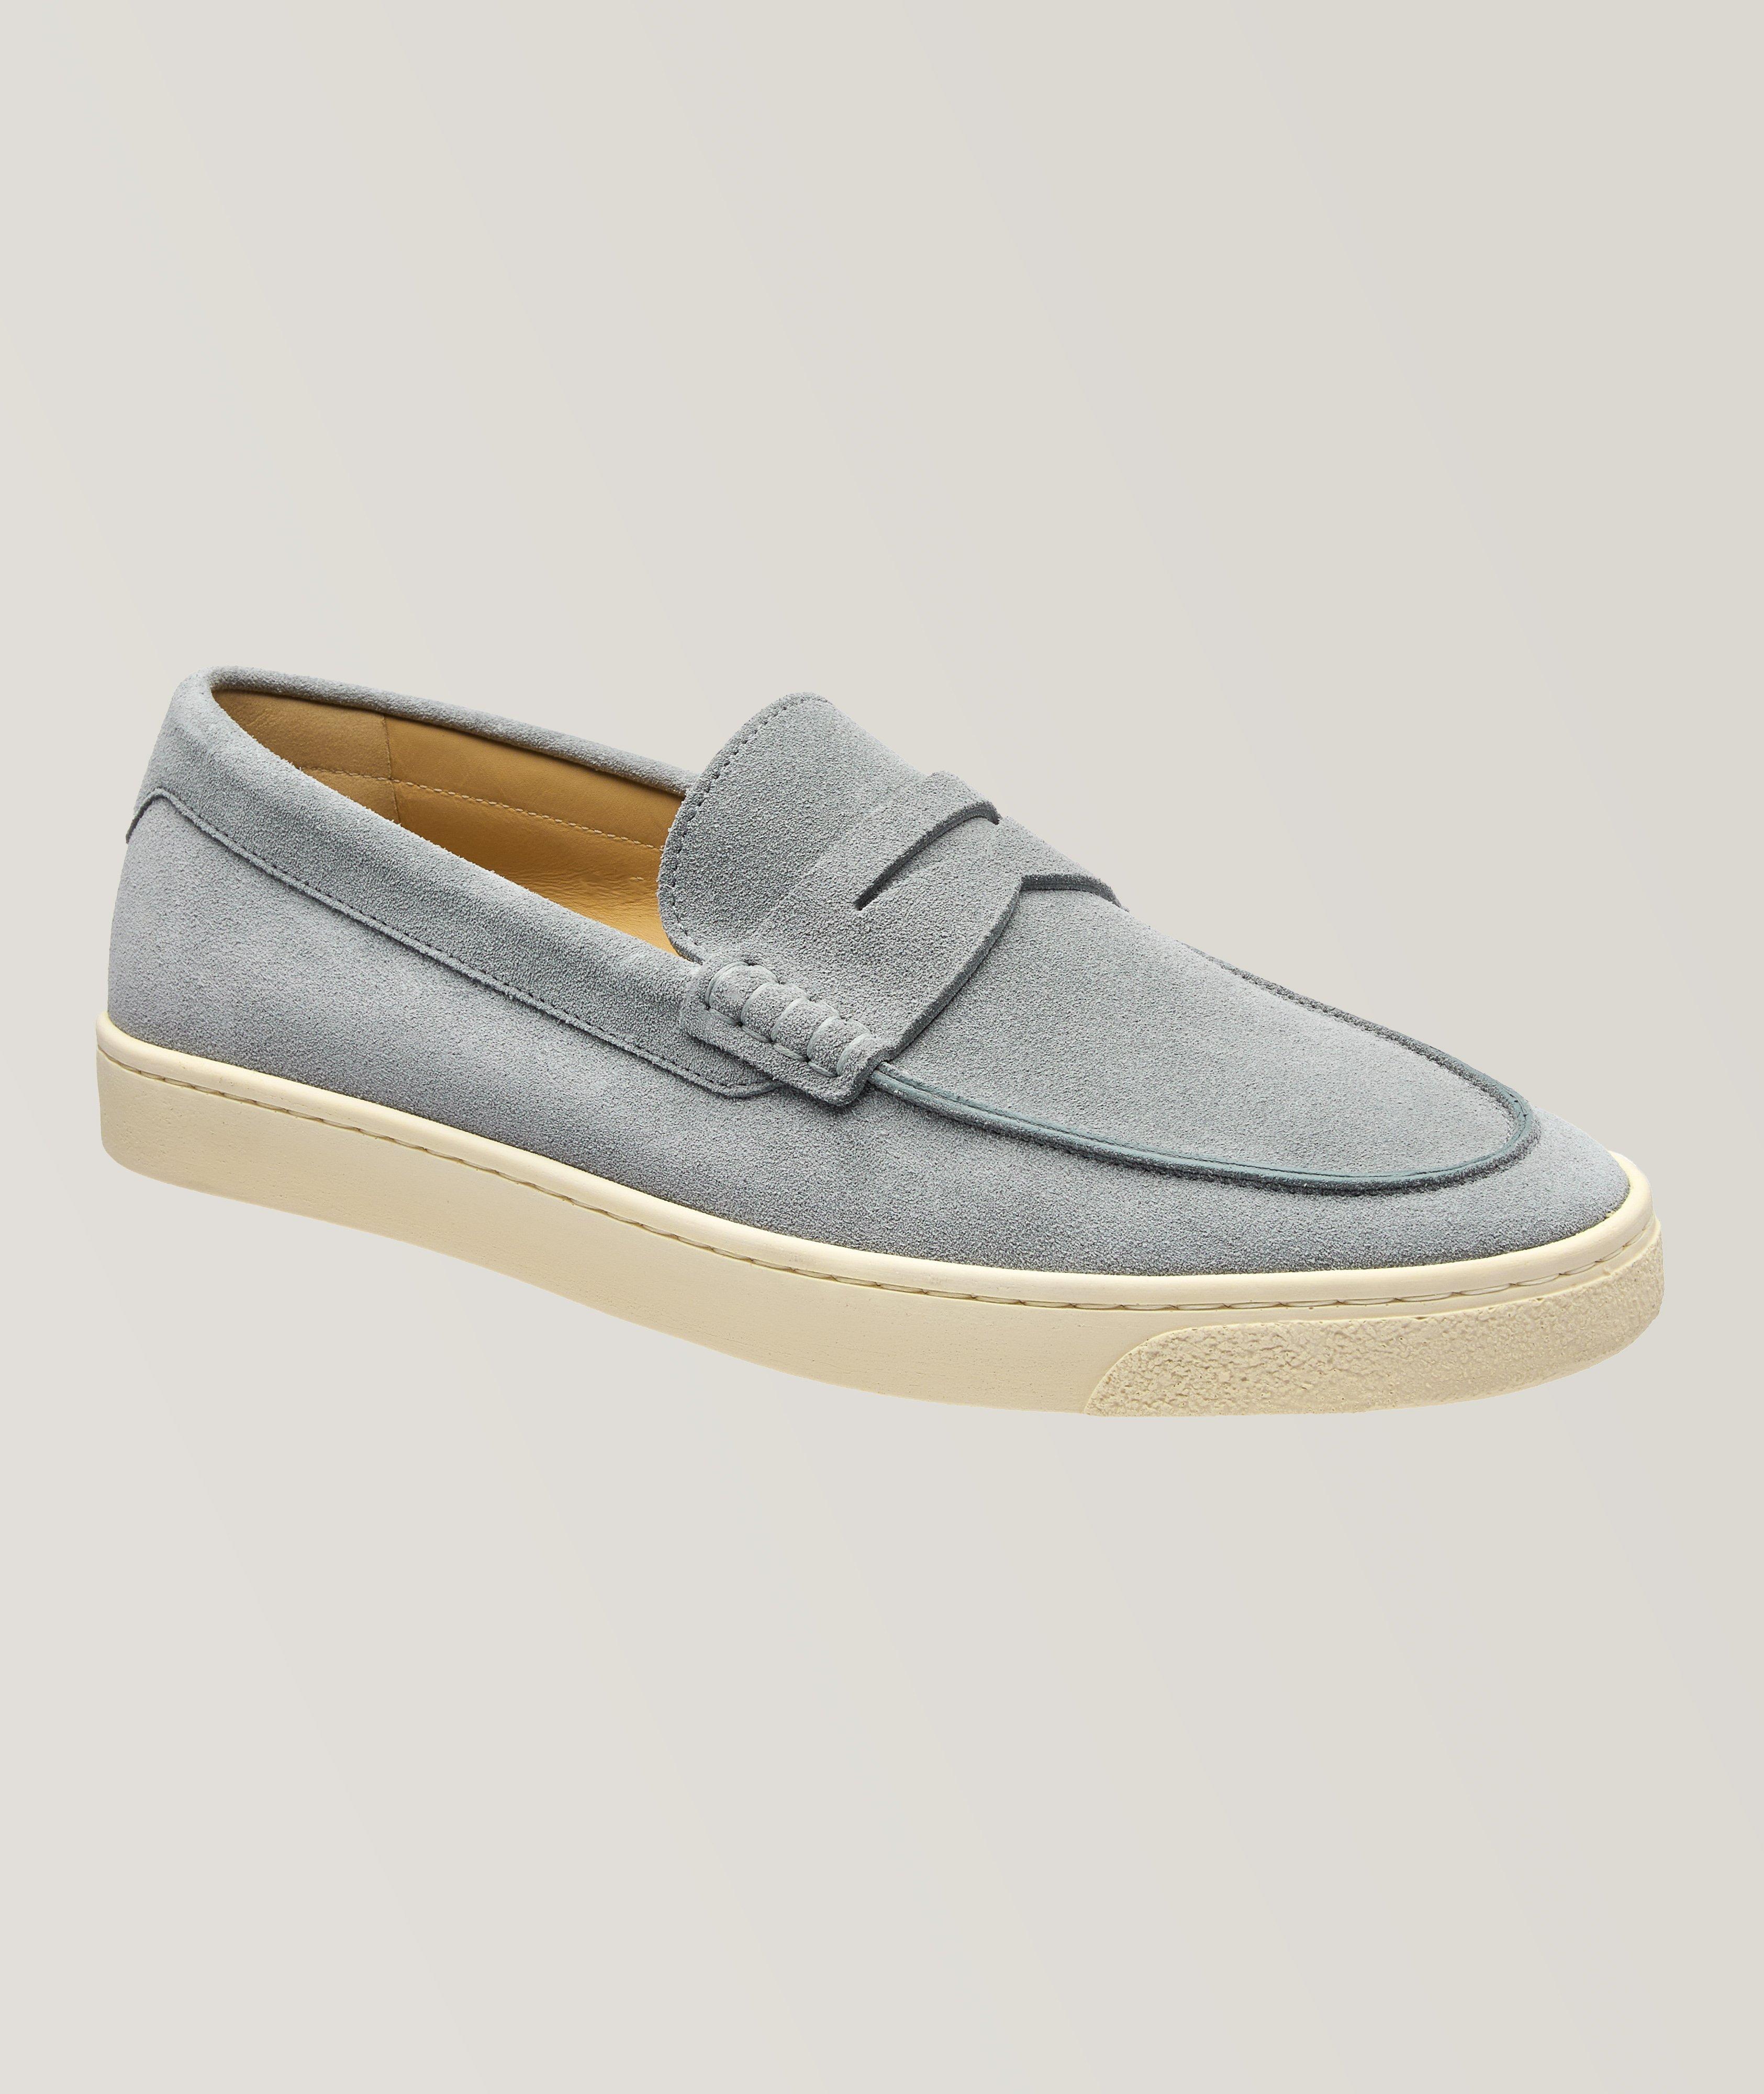 Suede Hybrid Penny Loafers image 0